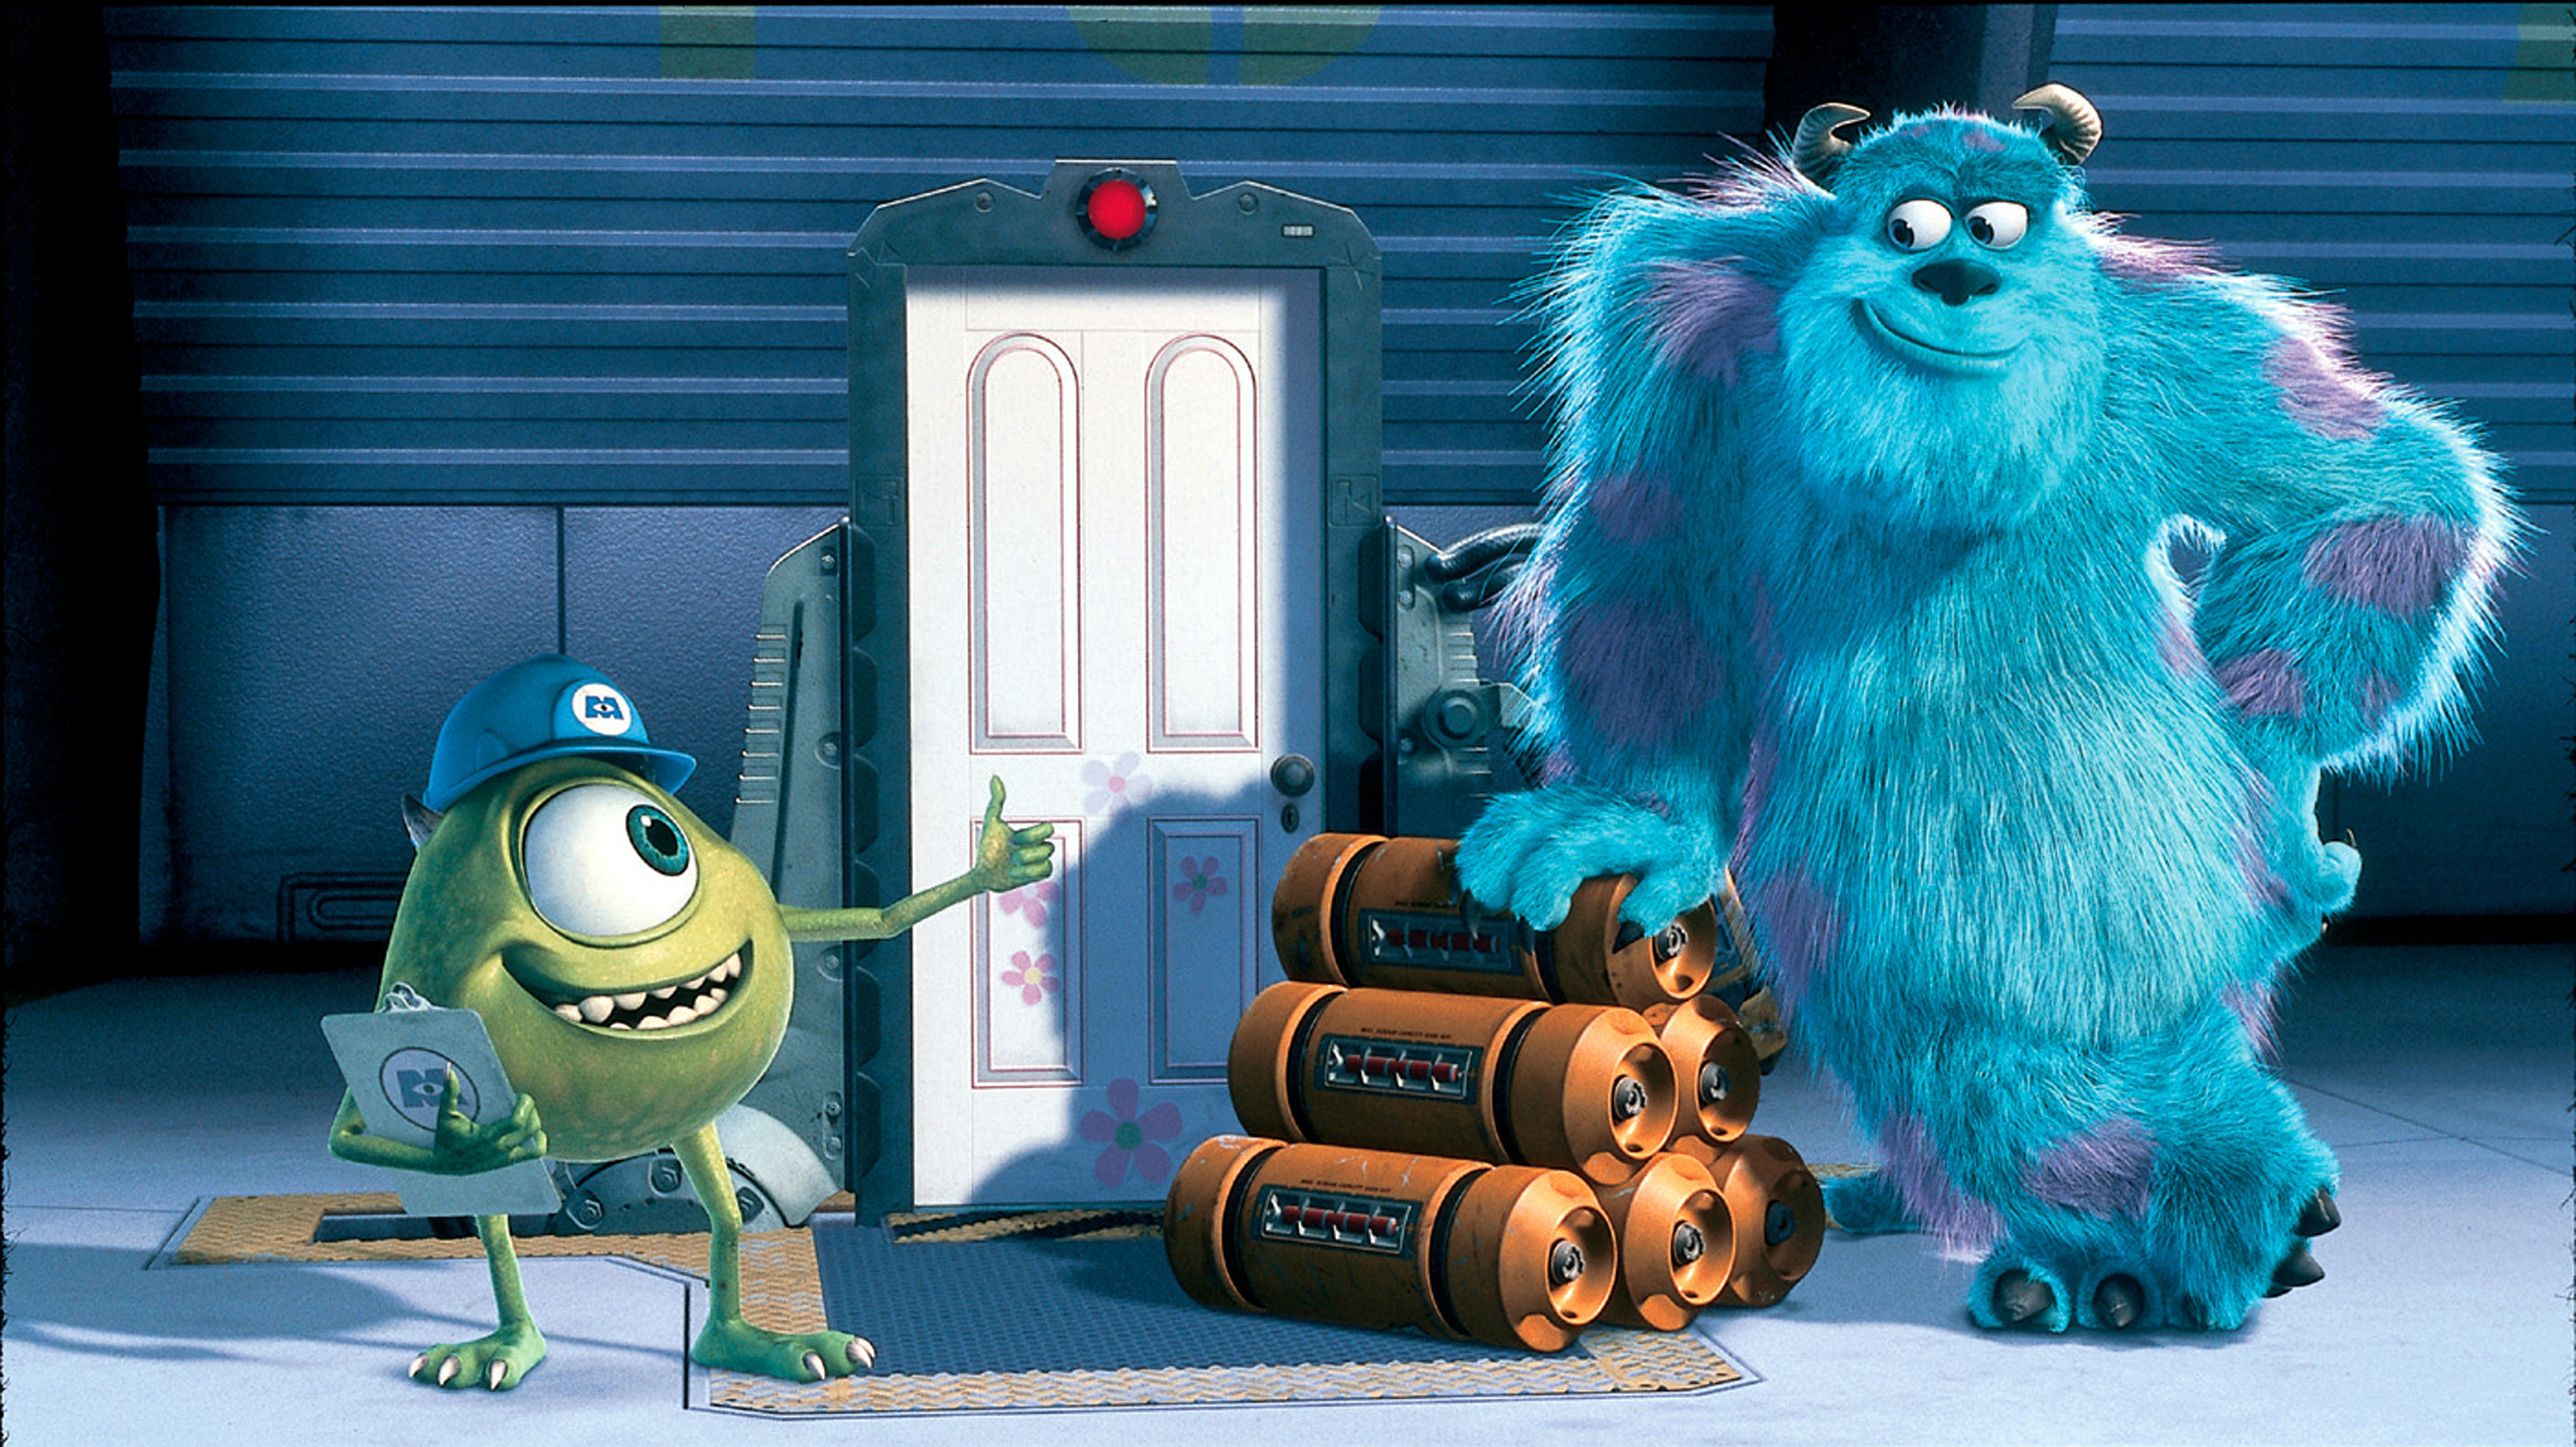 Mike Wazowski giving a thumbs-up to Sulley